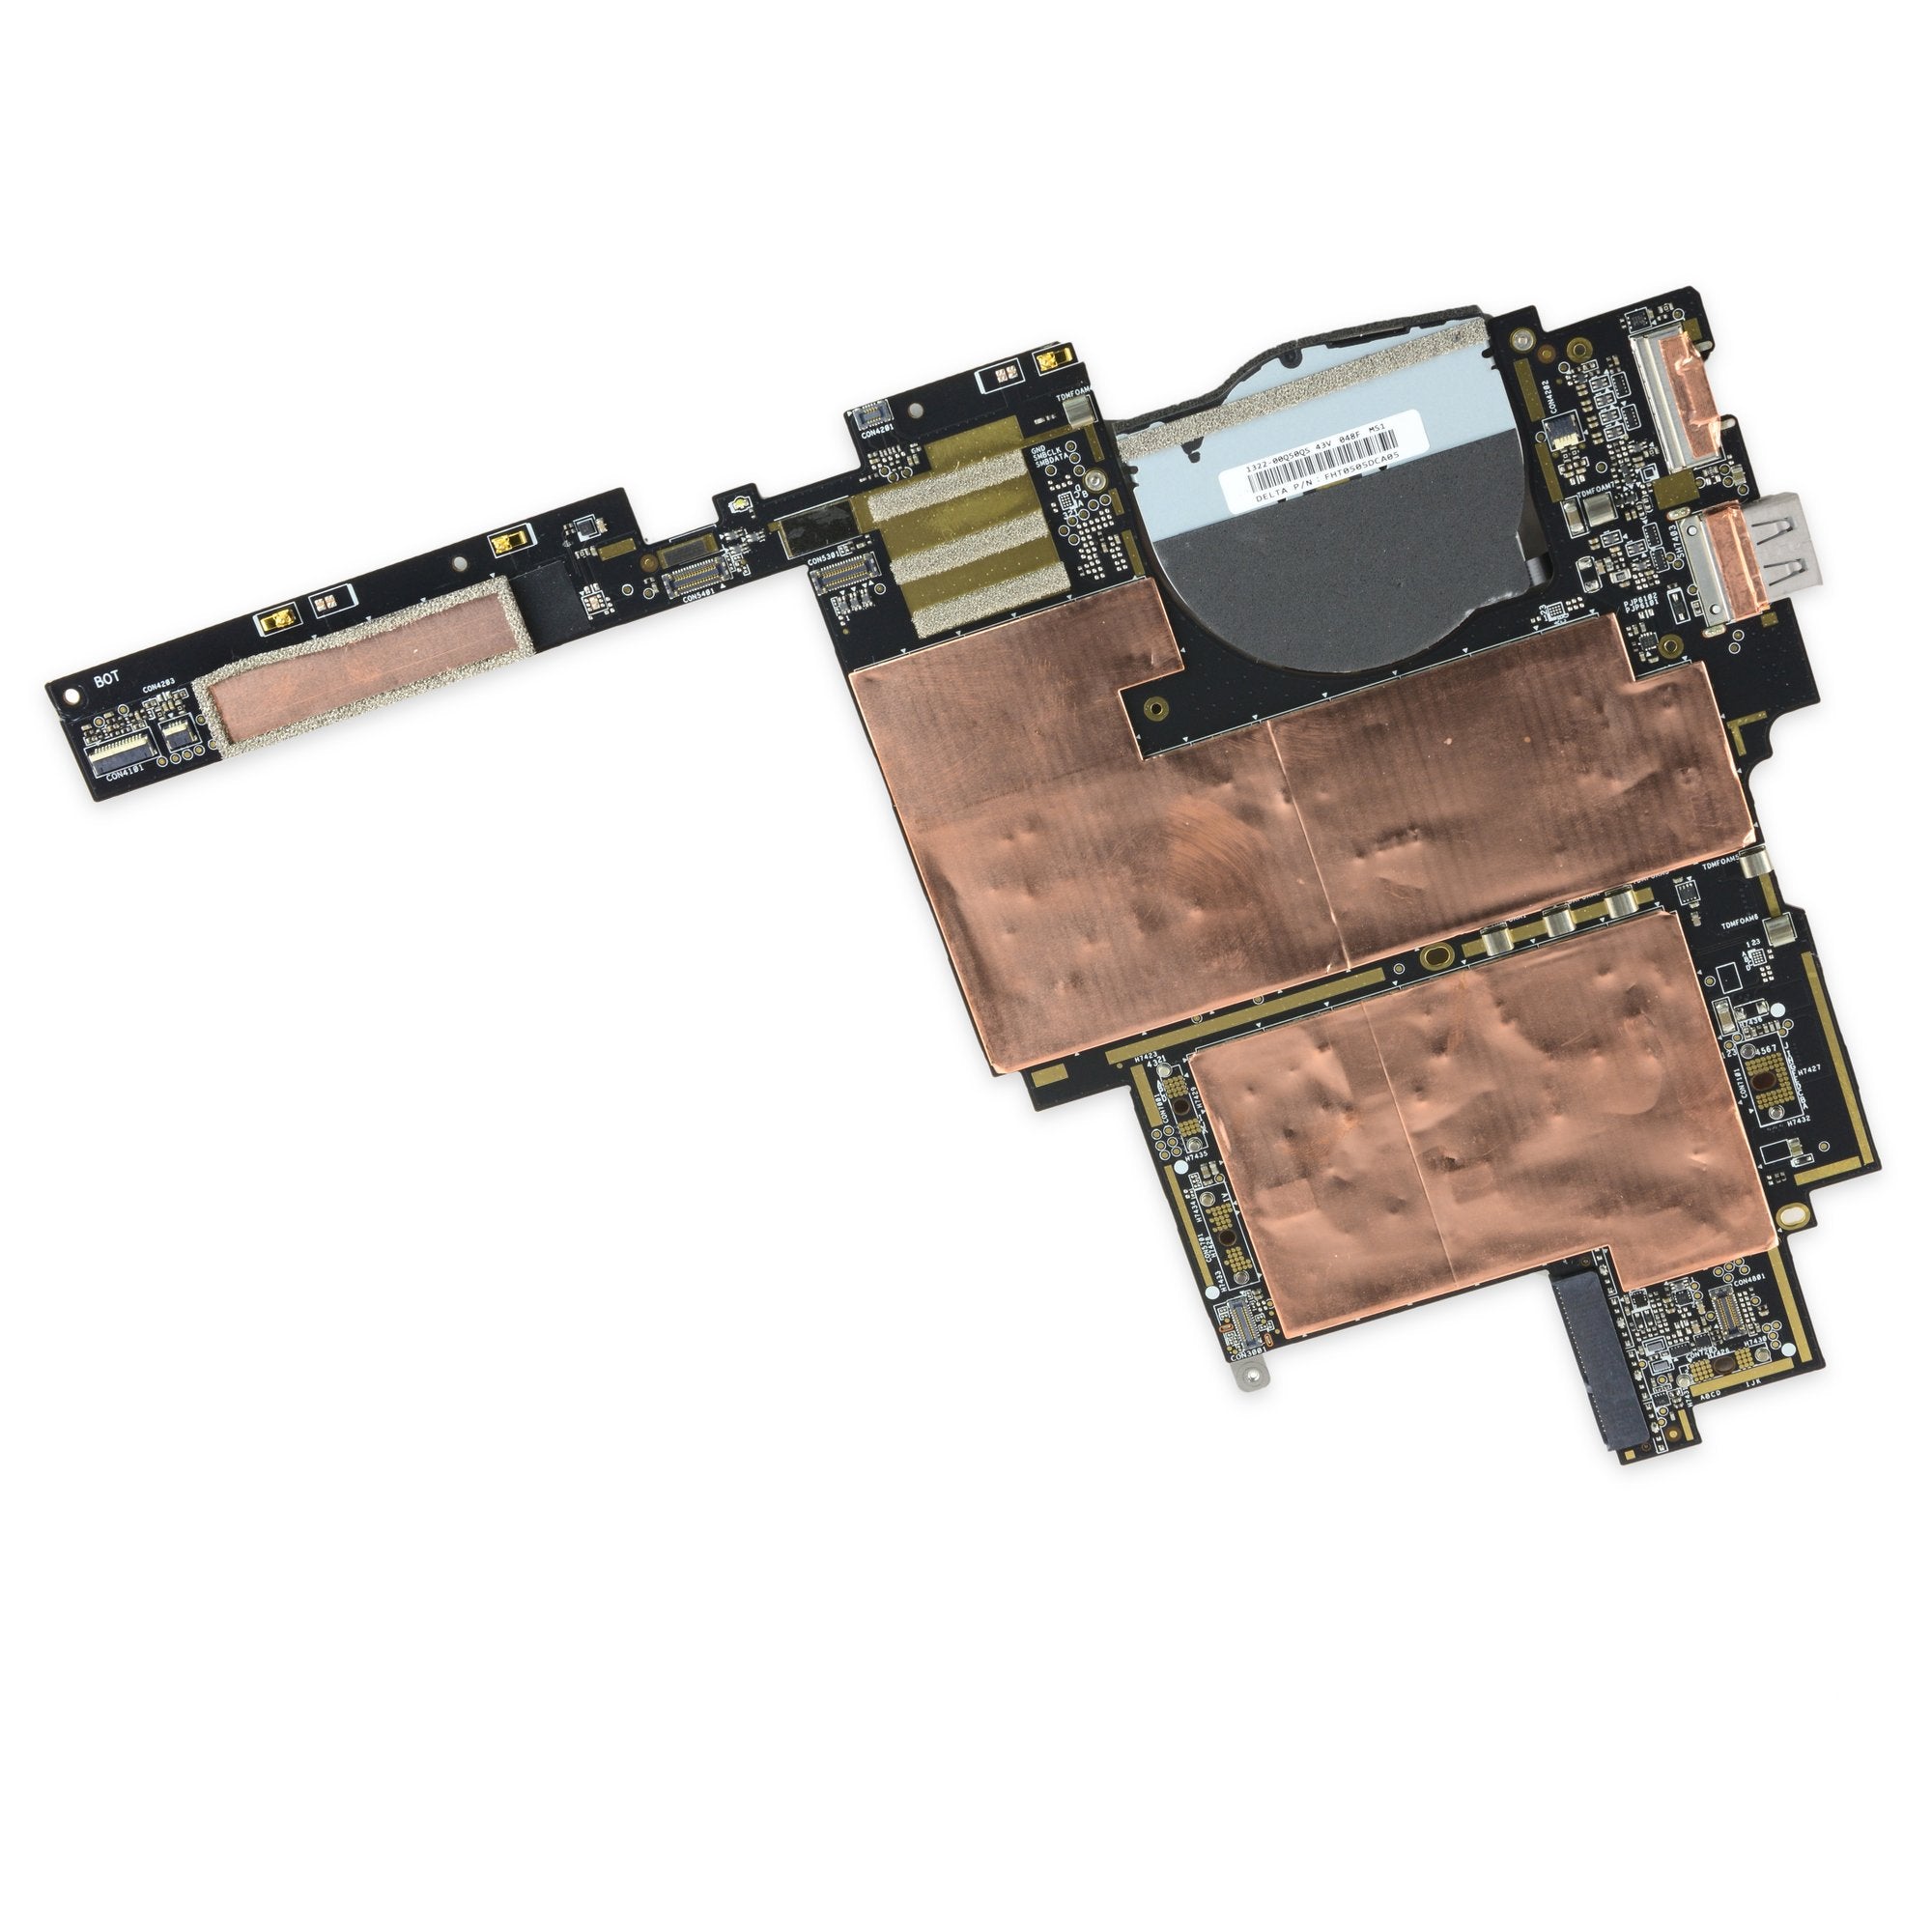 Surface Pro 3 Motherboard